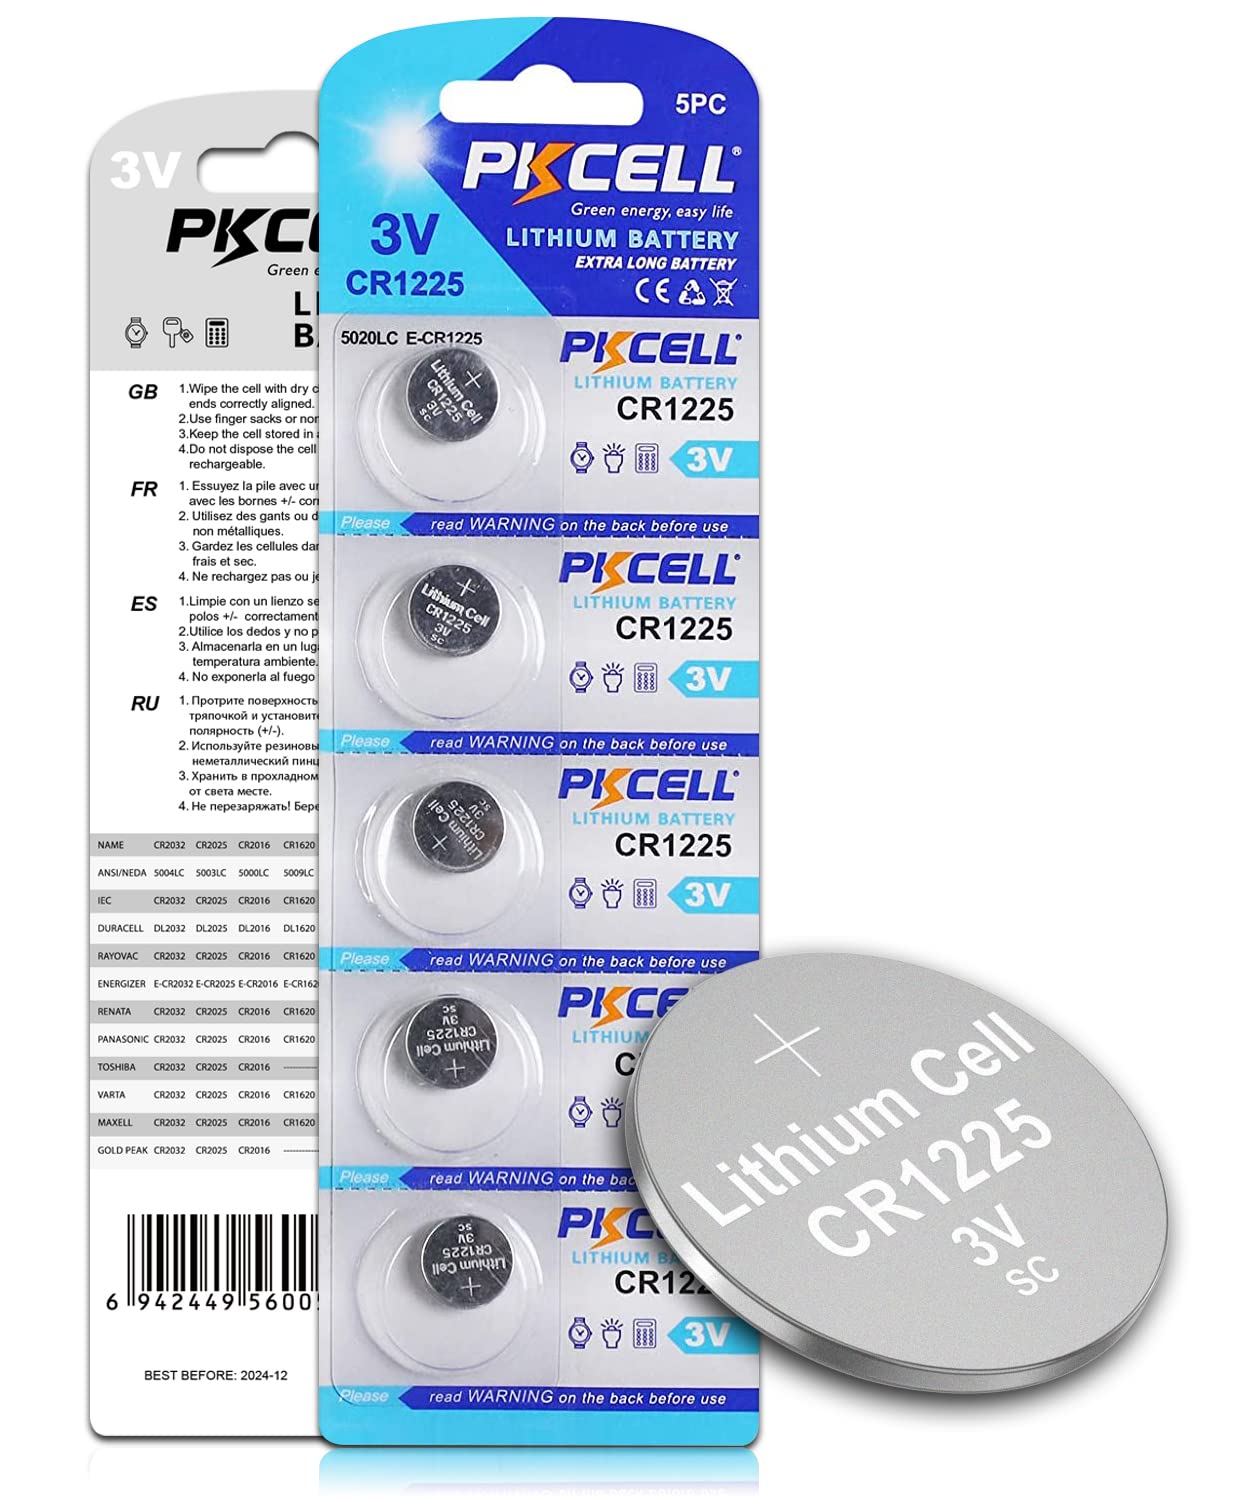 PKCELL CR1225 Battery 3V Lithium Button Coin Cell for Car Key 5-Year Shelf Life (5 Counts)